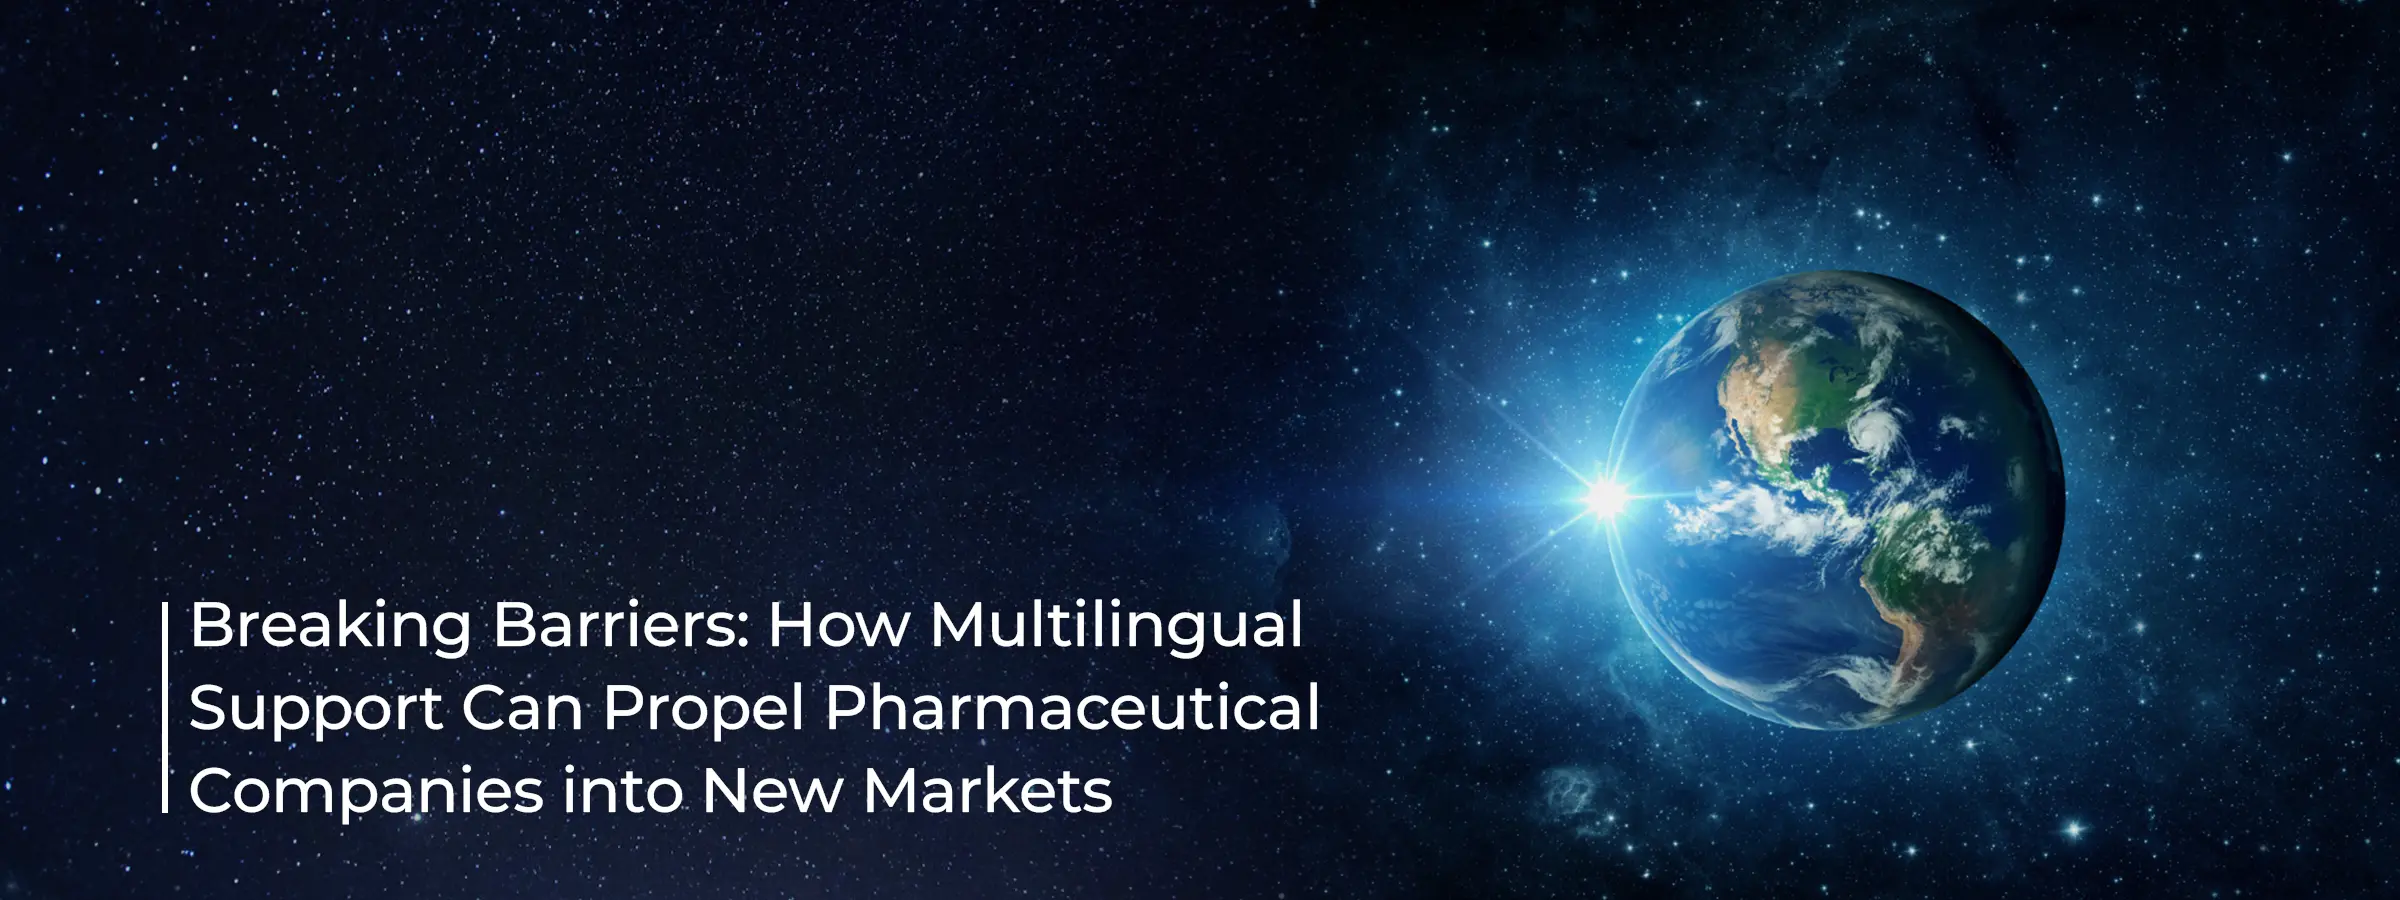 pharmaceutical-companies-into-new-markets-blog-banner